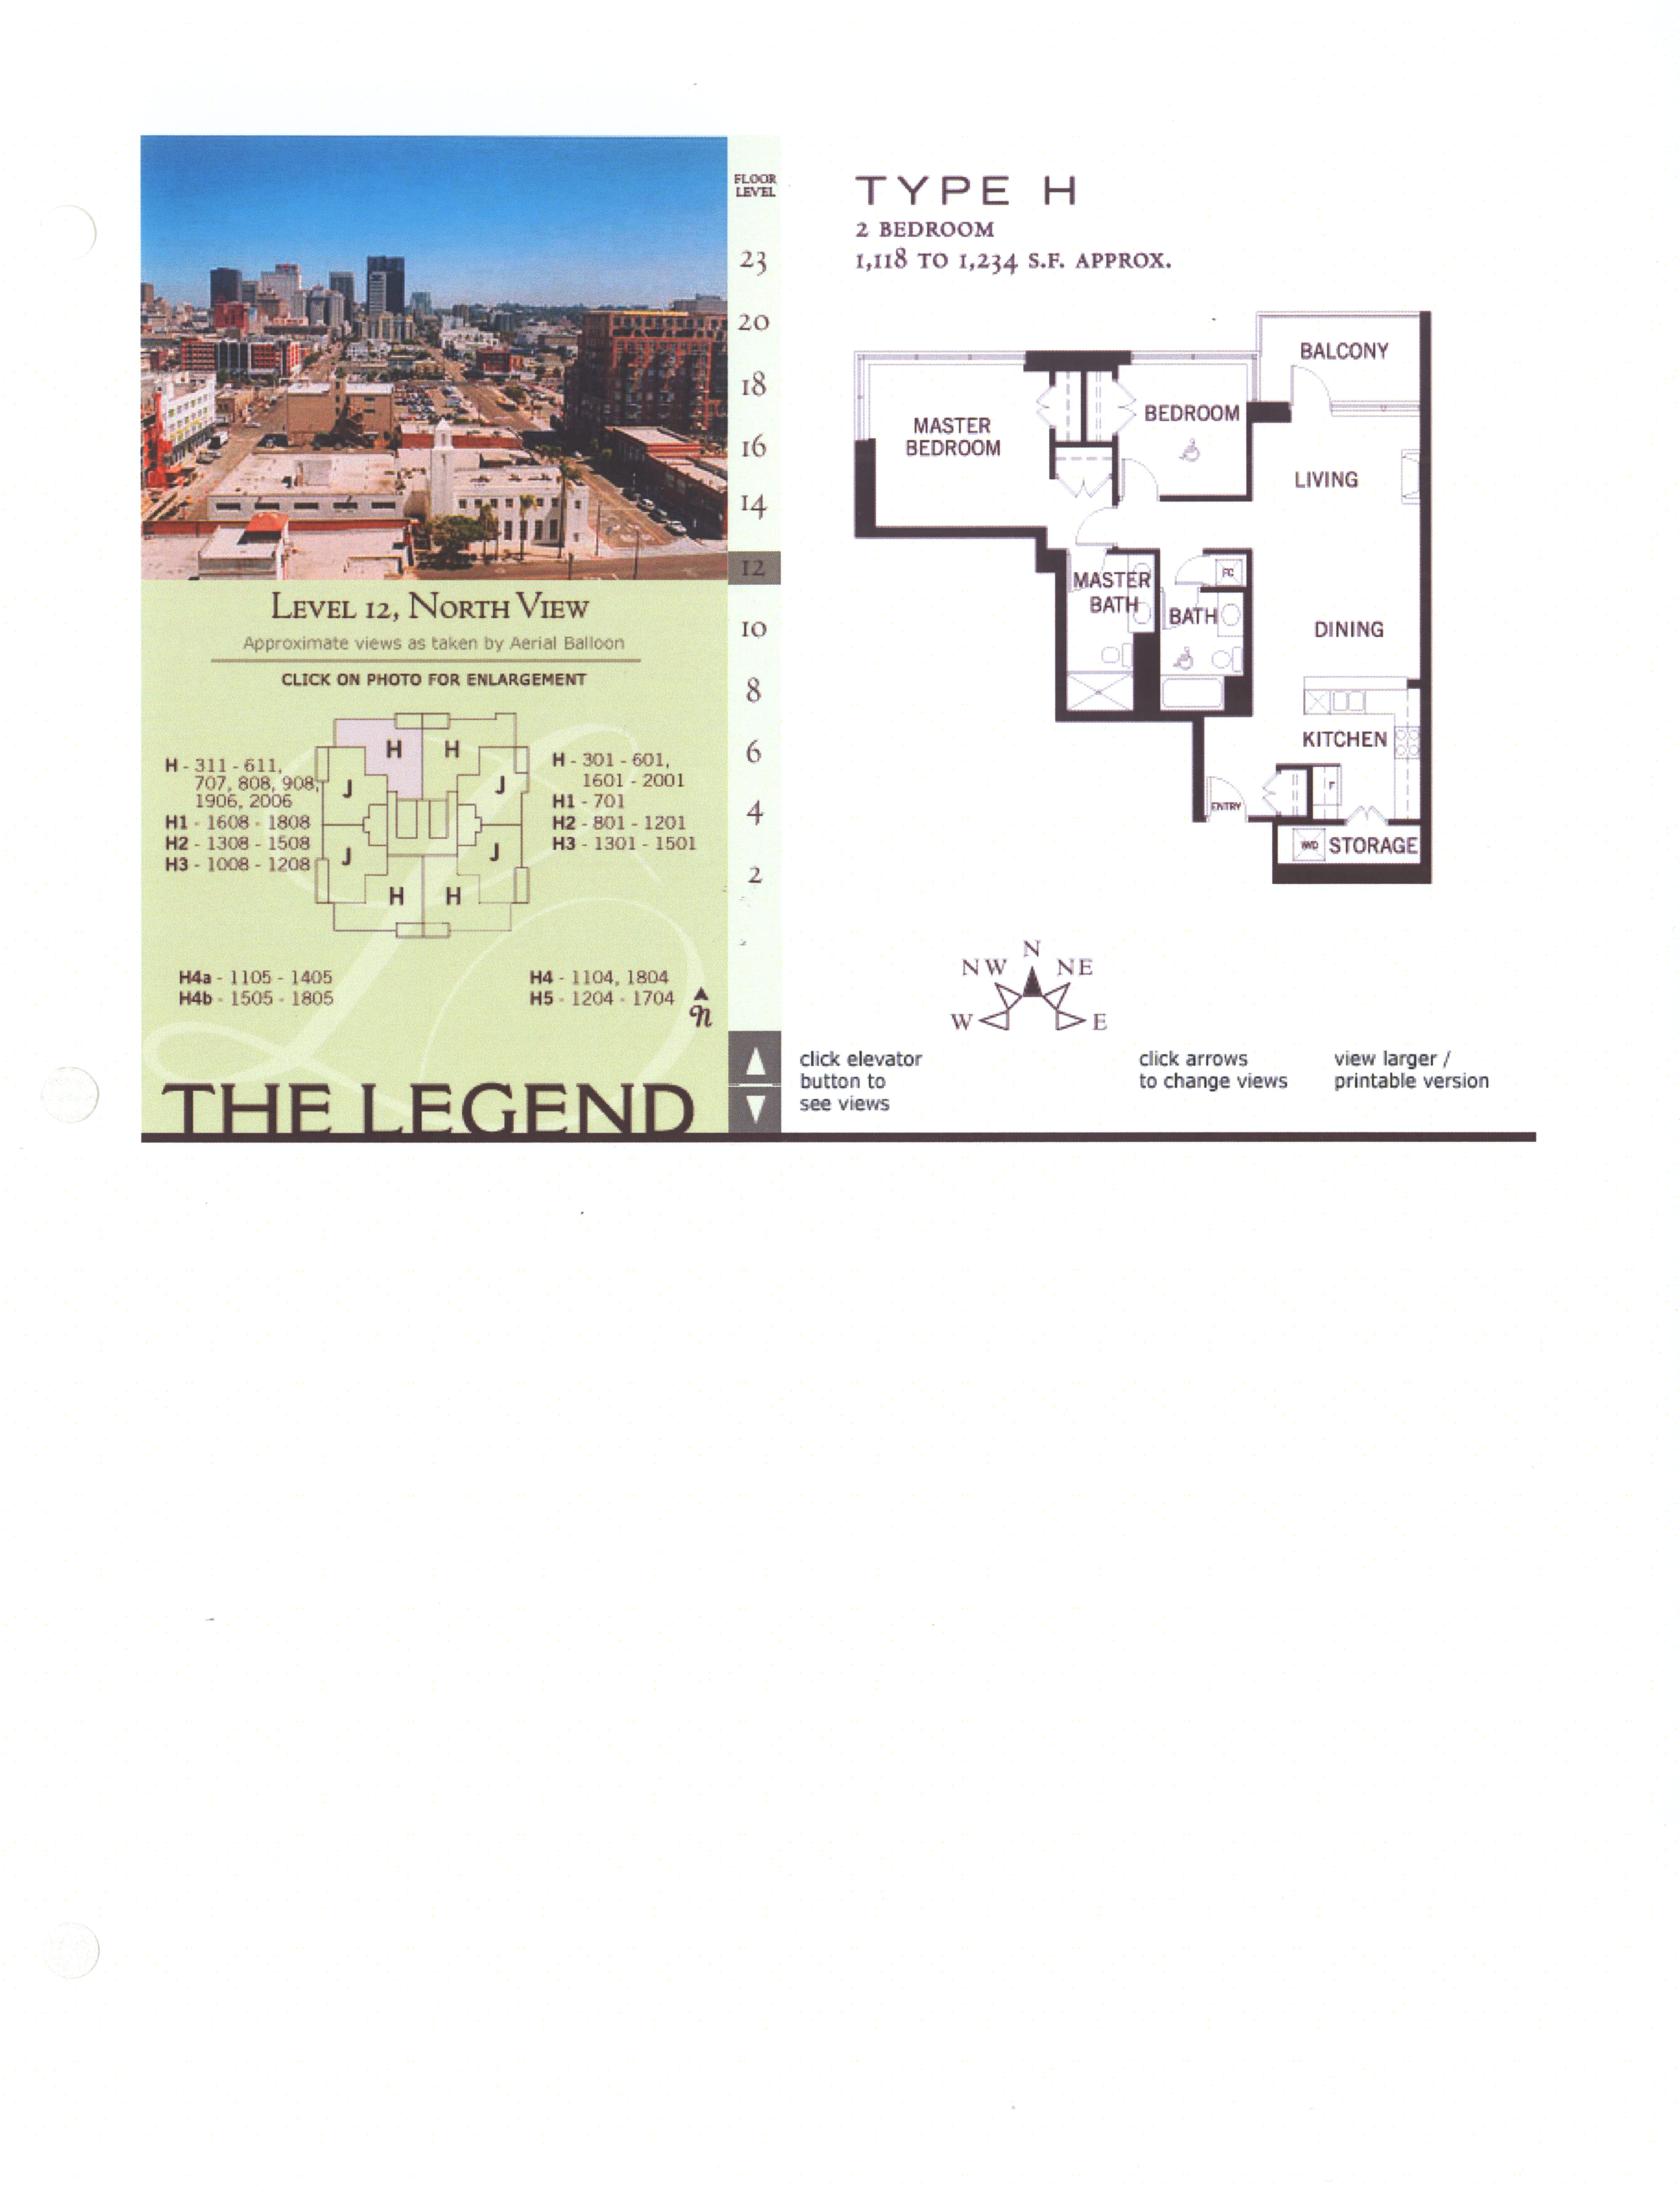 The Legend Floor Plan Level 12, North View – Type H